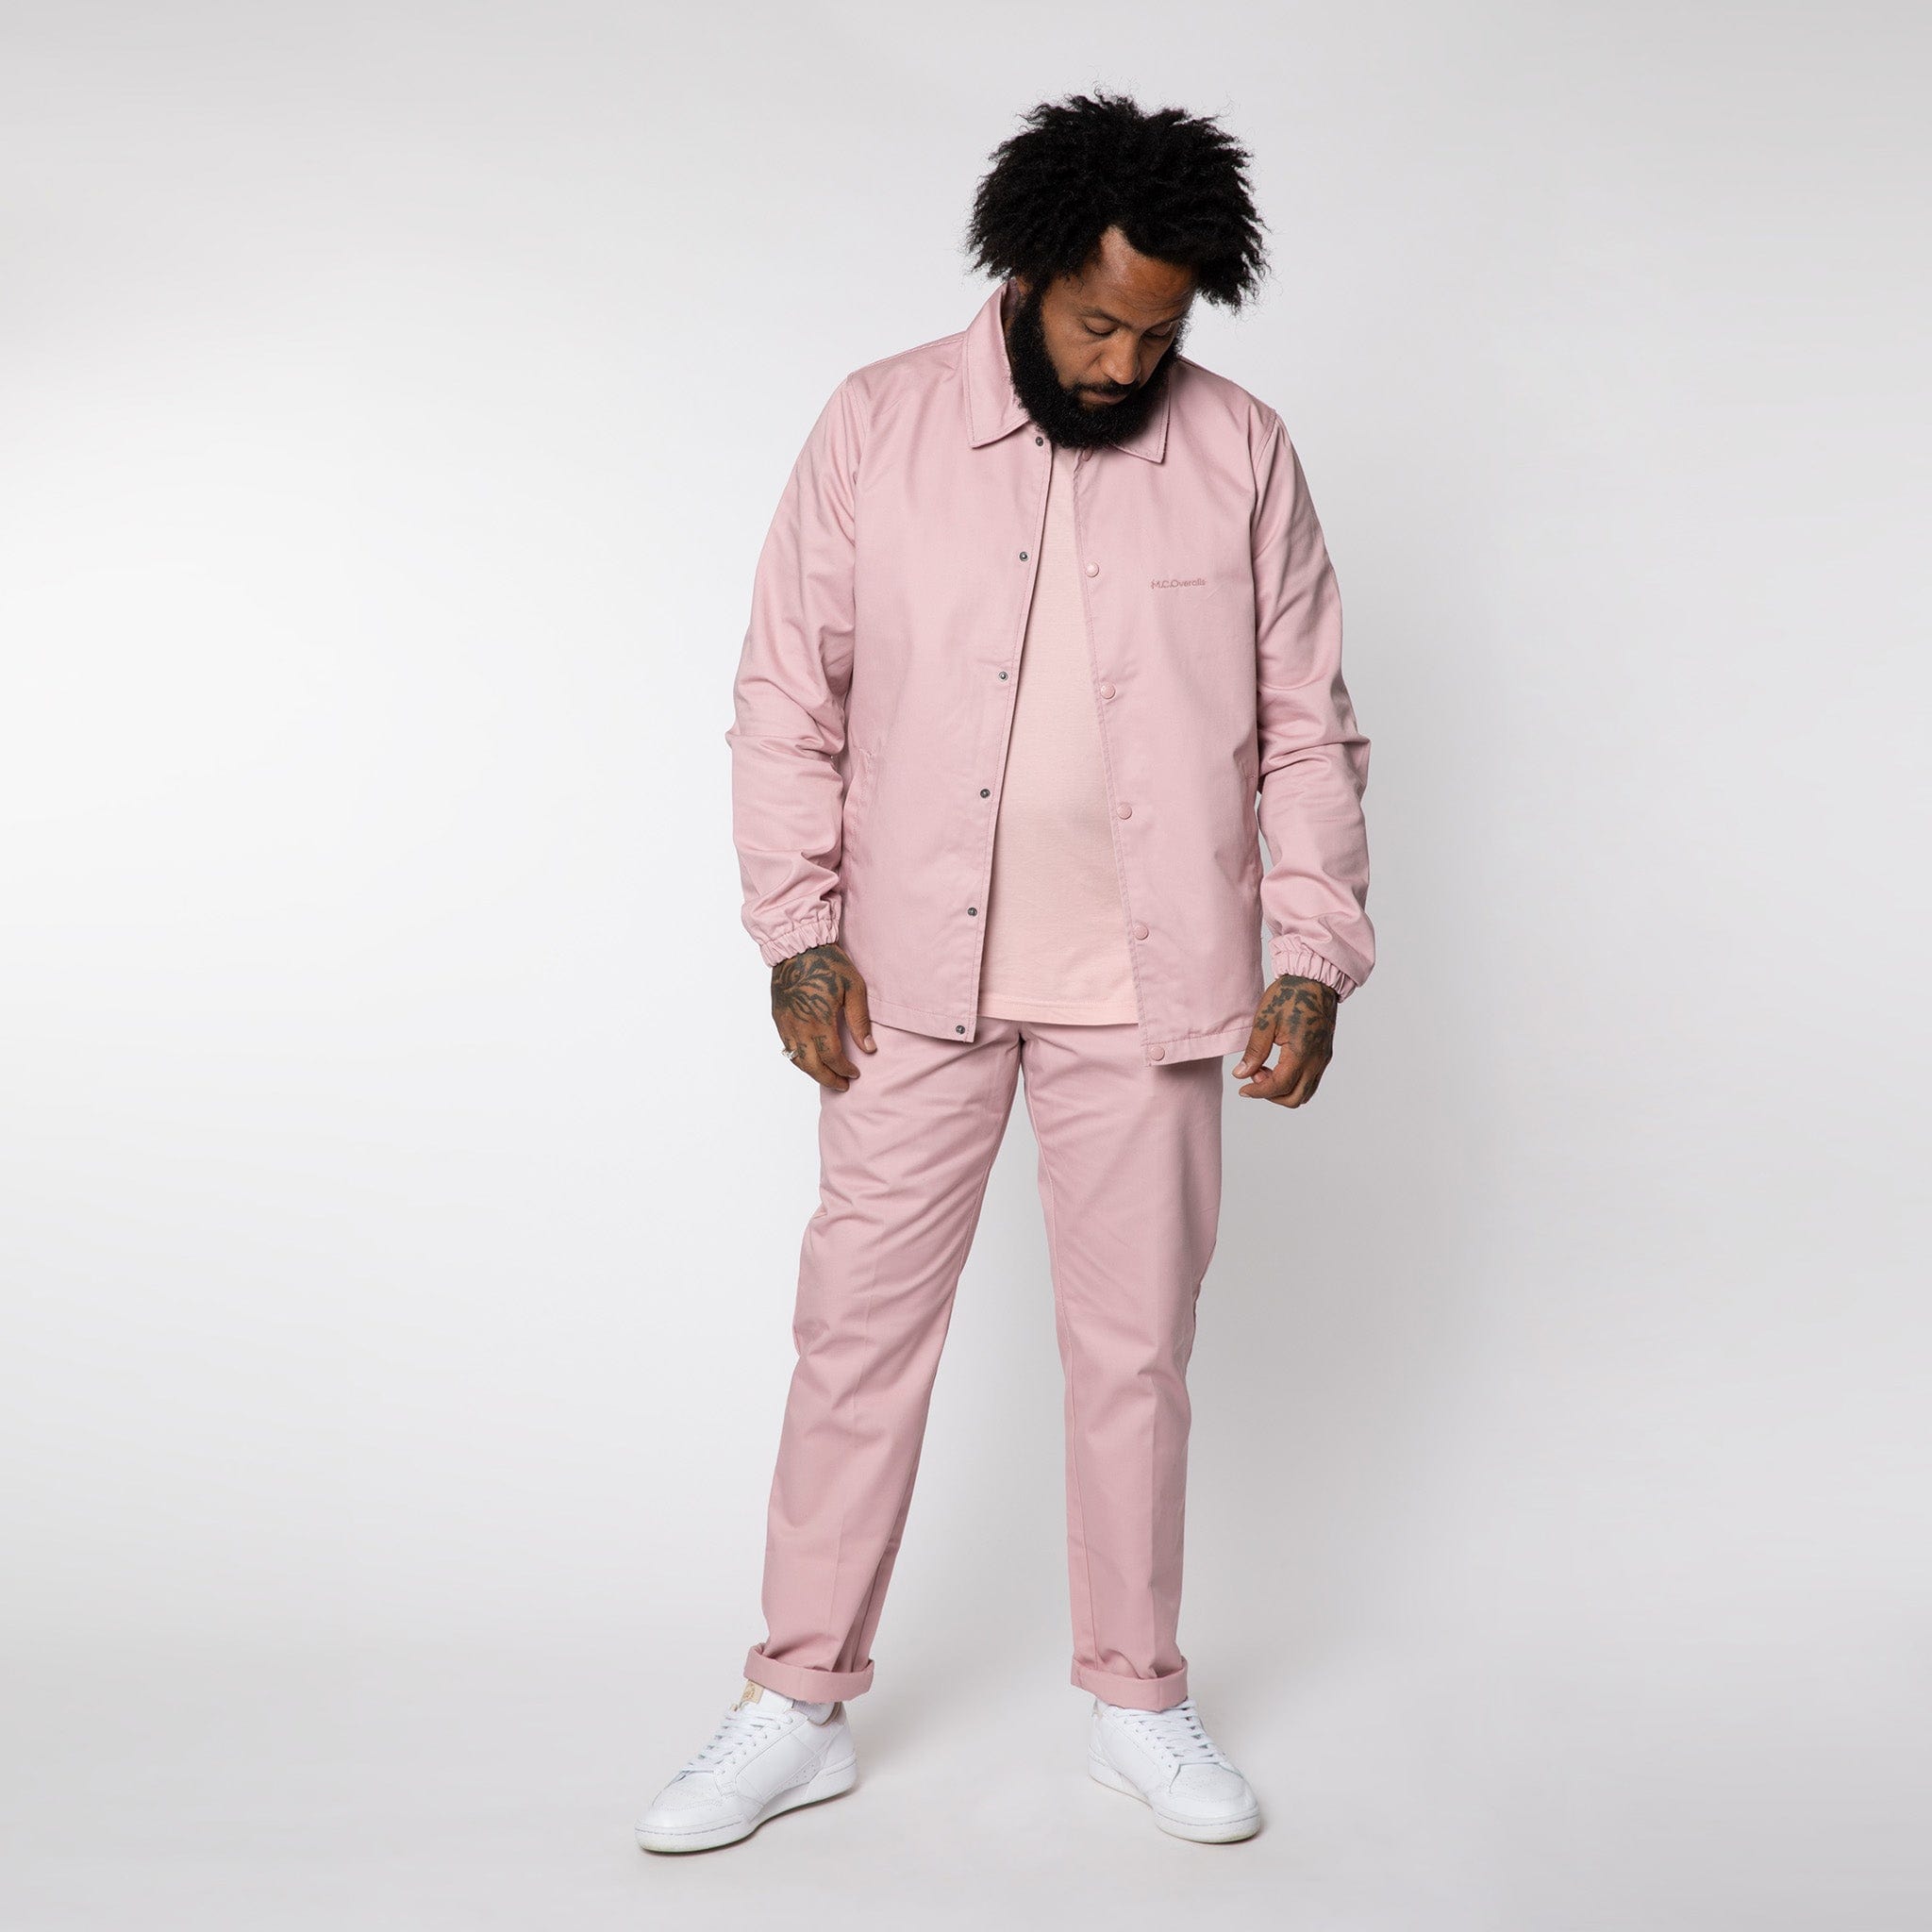 M.C.O's Premium Quality Pink Coach Jackets for Men in UK.